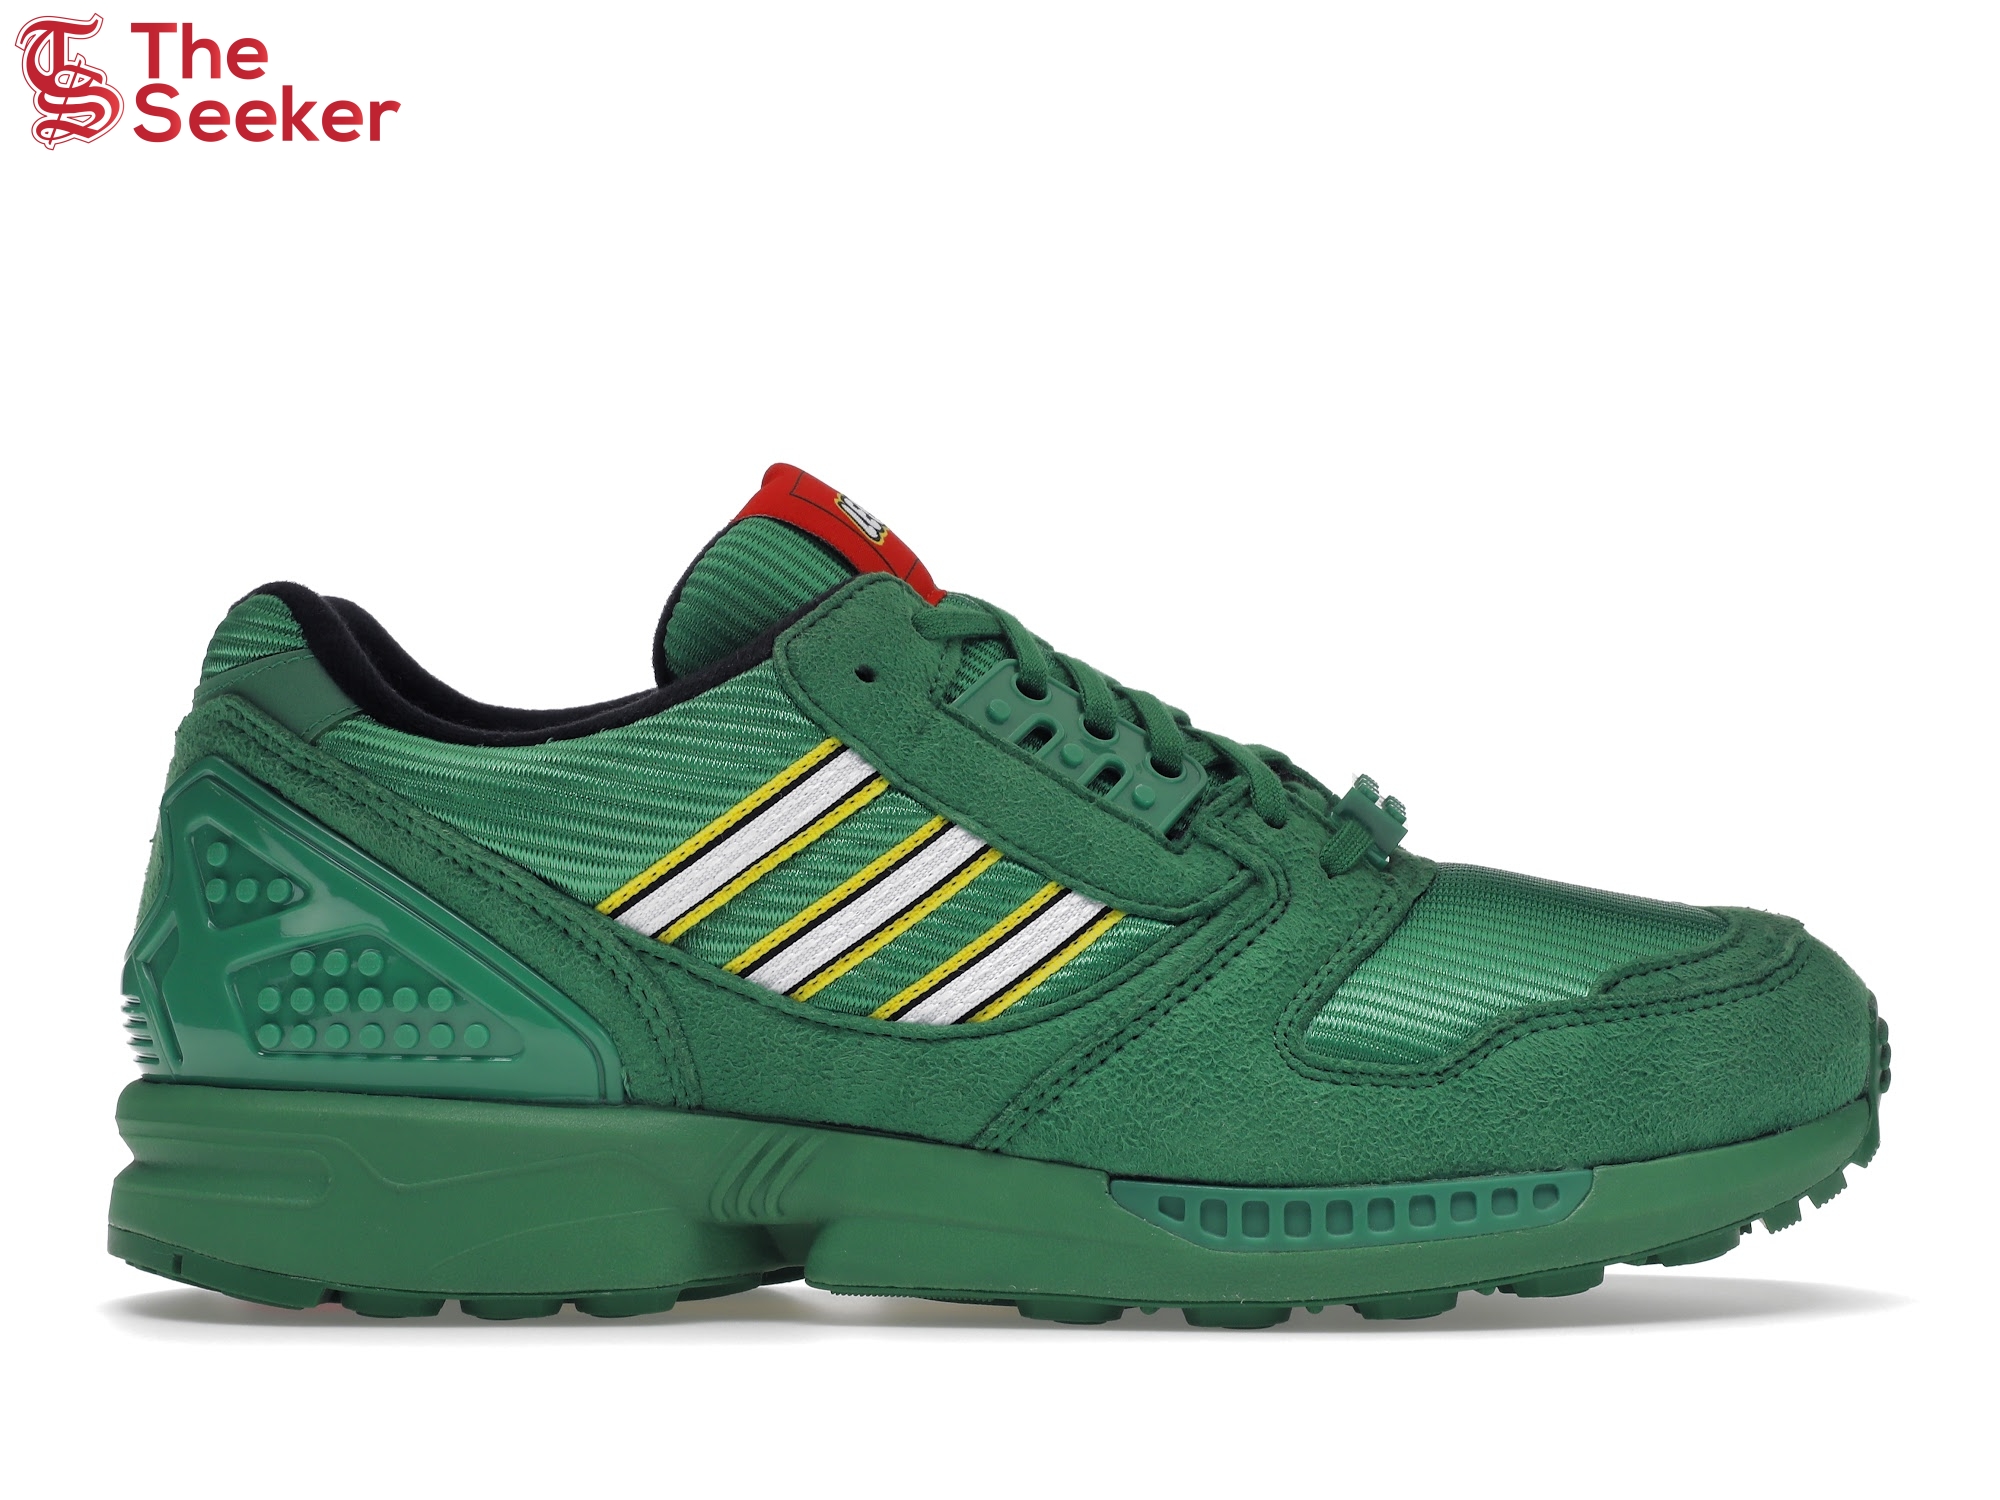 adidas ZX 8000 LEGO Color Pack Green